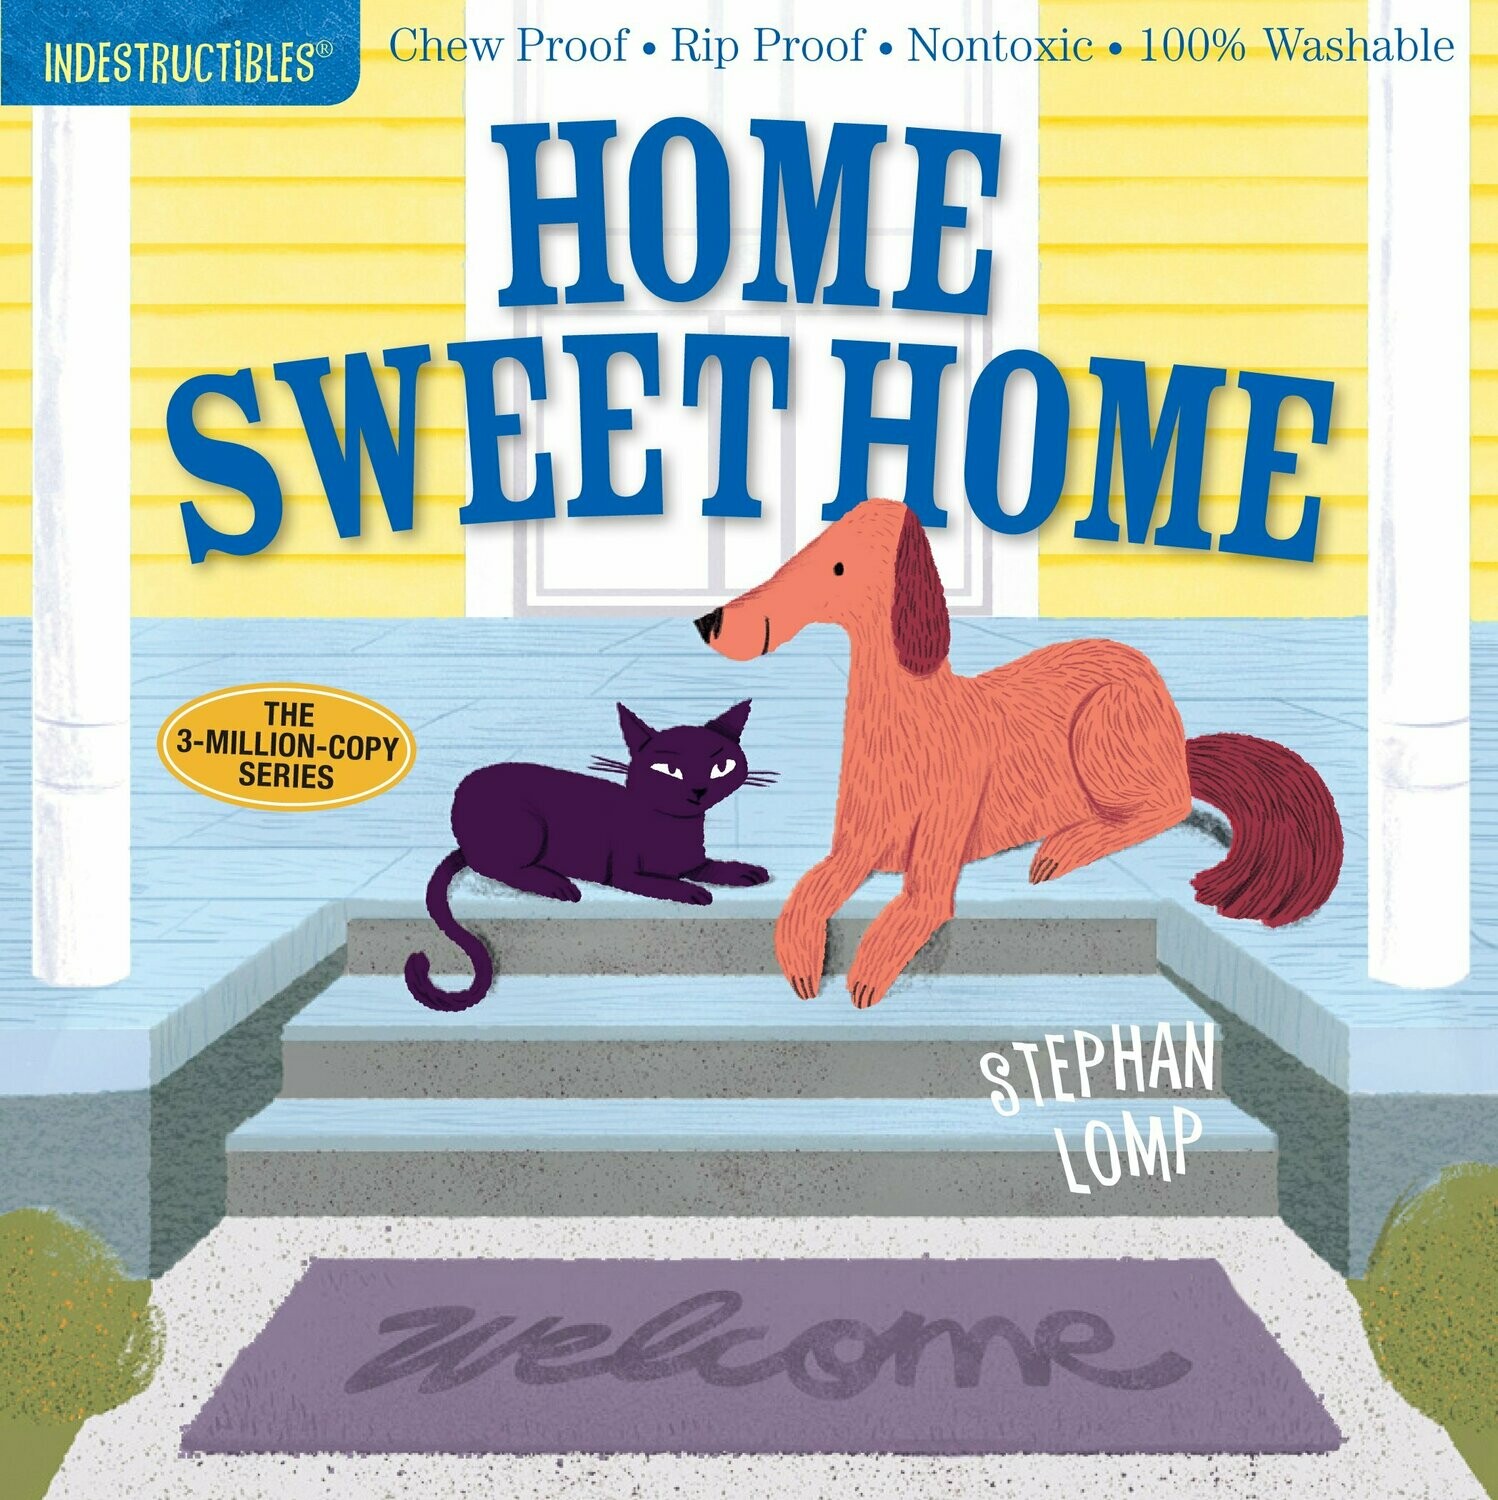 Indestructibles Book "Home Sweet Home"